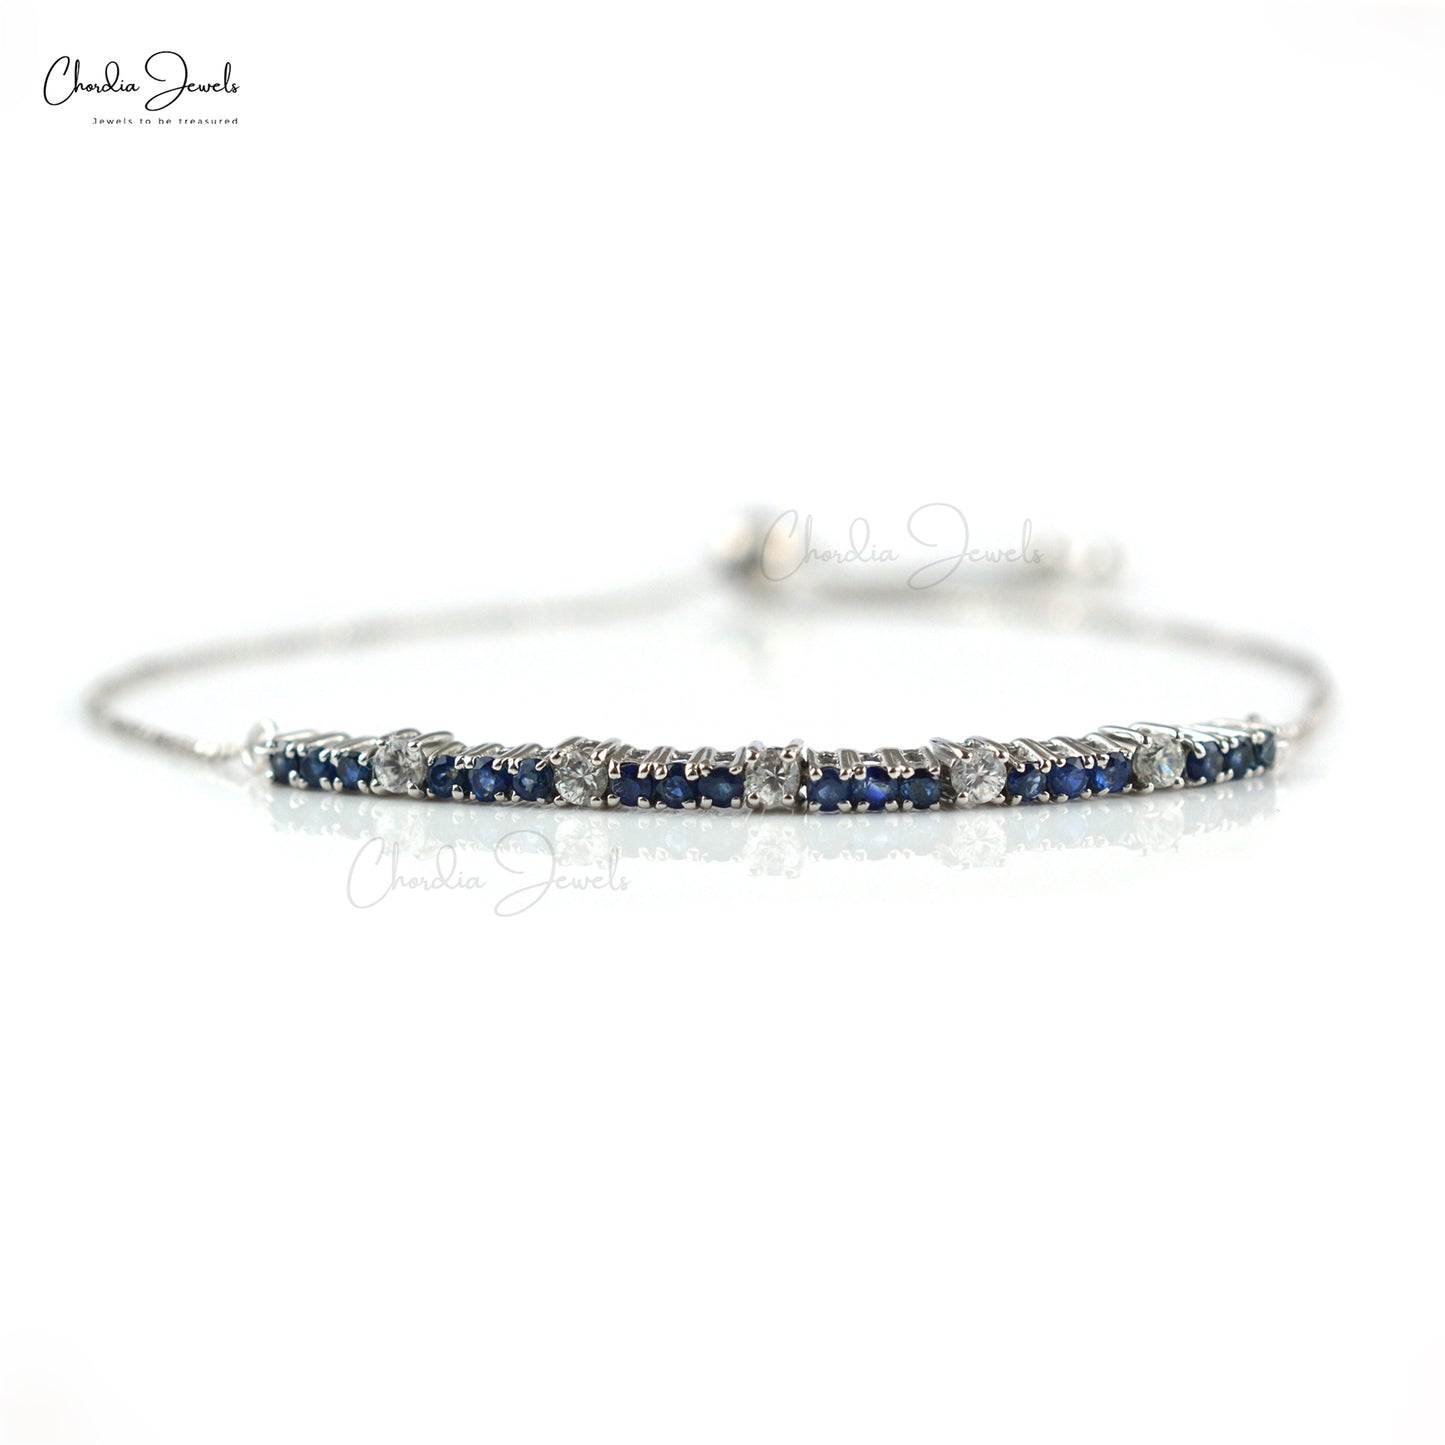 Load image into Gallery viewer, 925 Sterling Silver Jewelry Bracelet Authentic Blue Sapphire Tennis High Quality Jewelry At Offer Price Round Cut White Zircon Fashion Jewelry
